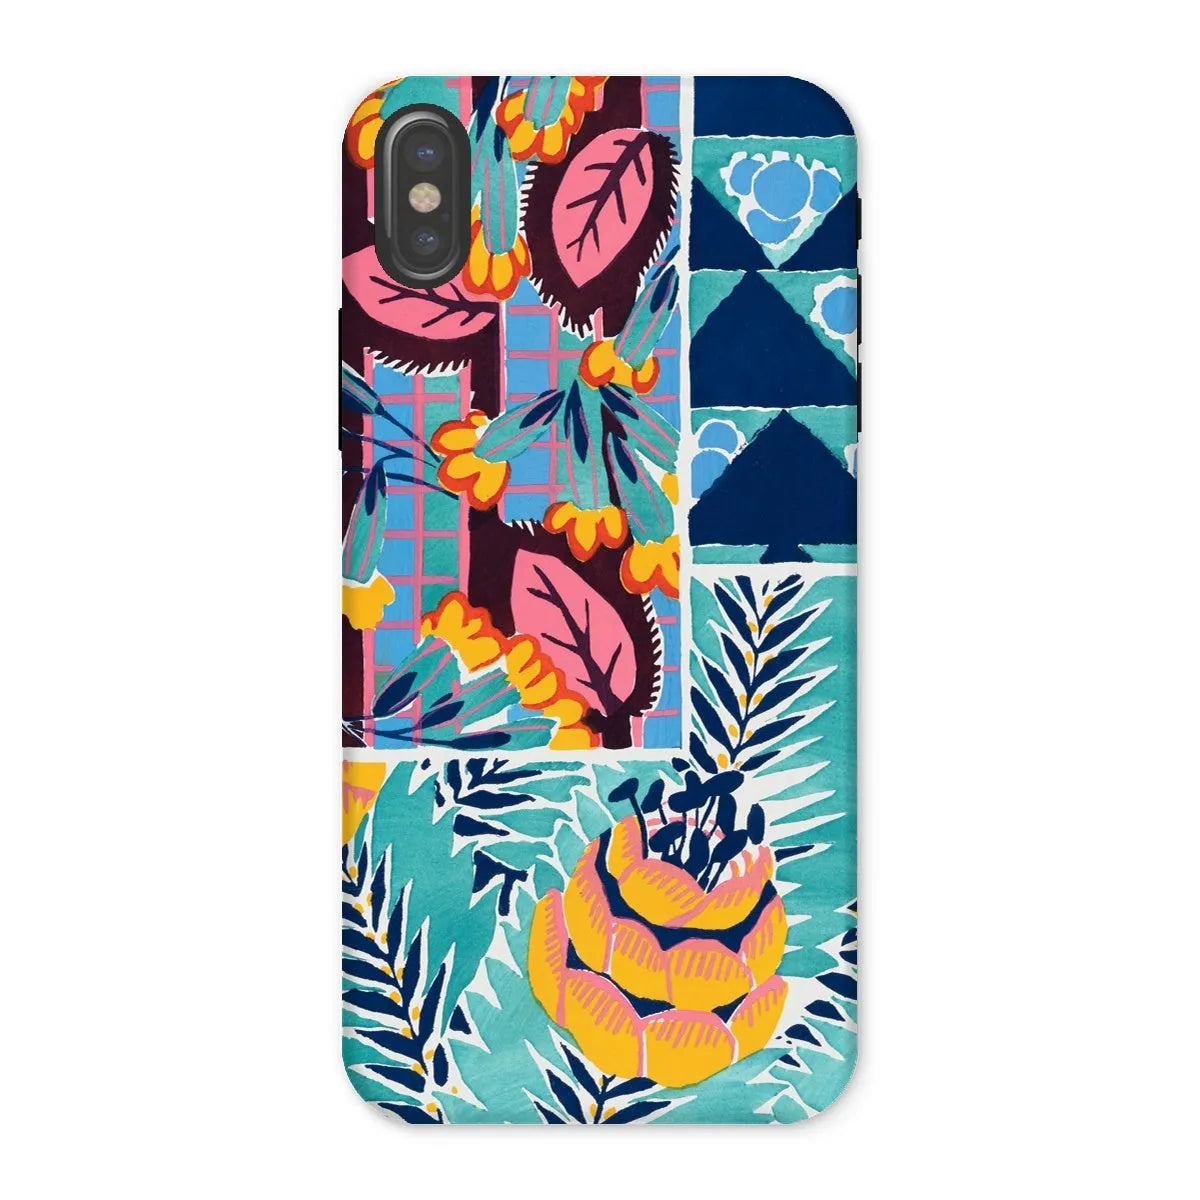 Fabric & Rugs - Pochoir Patterns Phone Case - E. A. Séguy - Iphone x / Matte - Mobile Phone Cases - Aesthetic Art